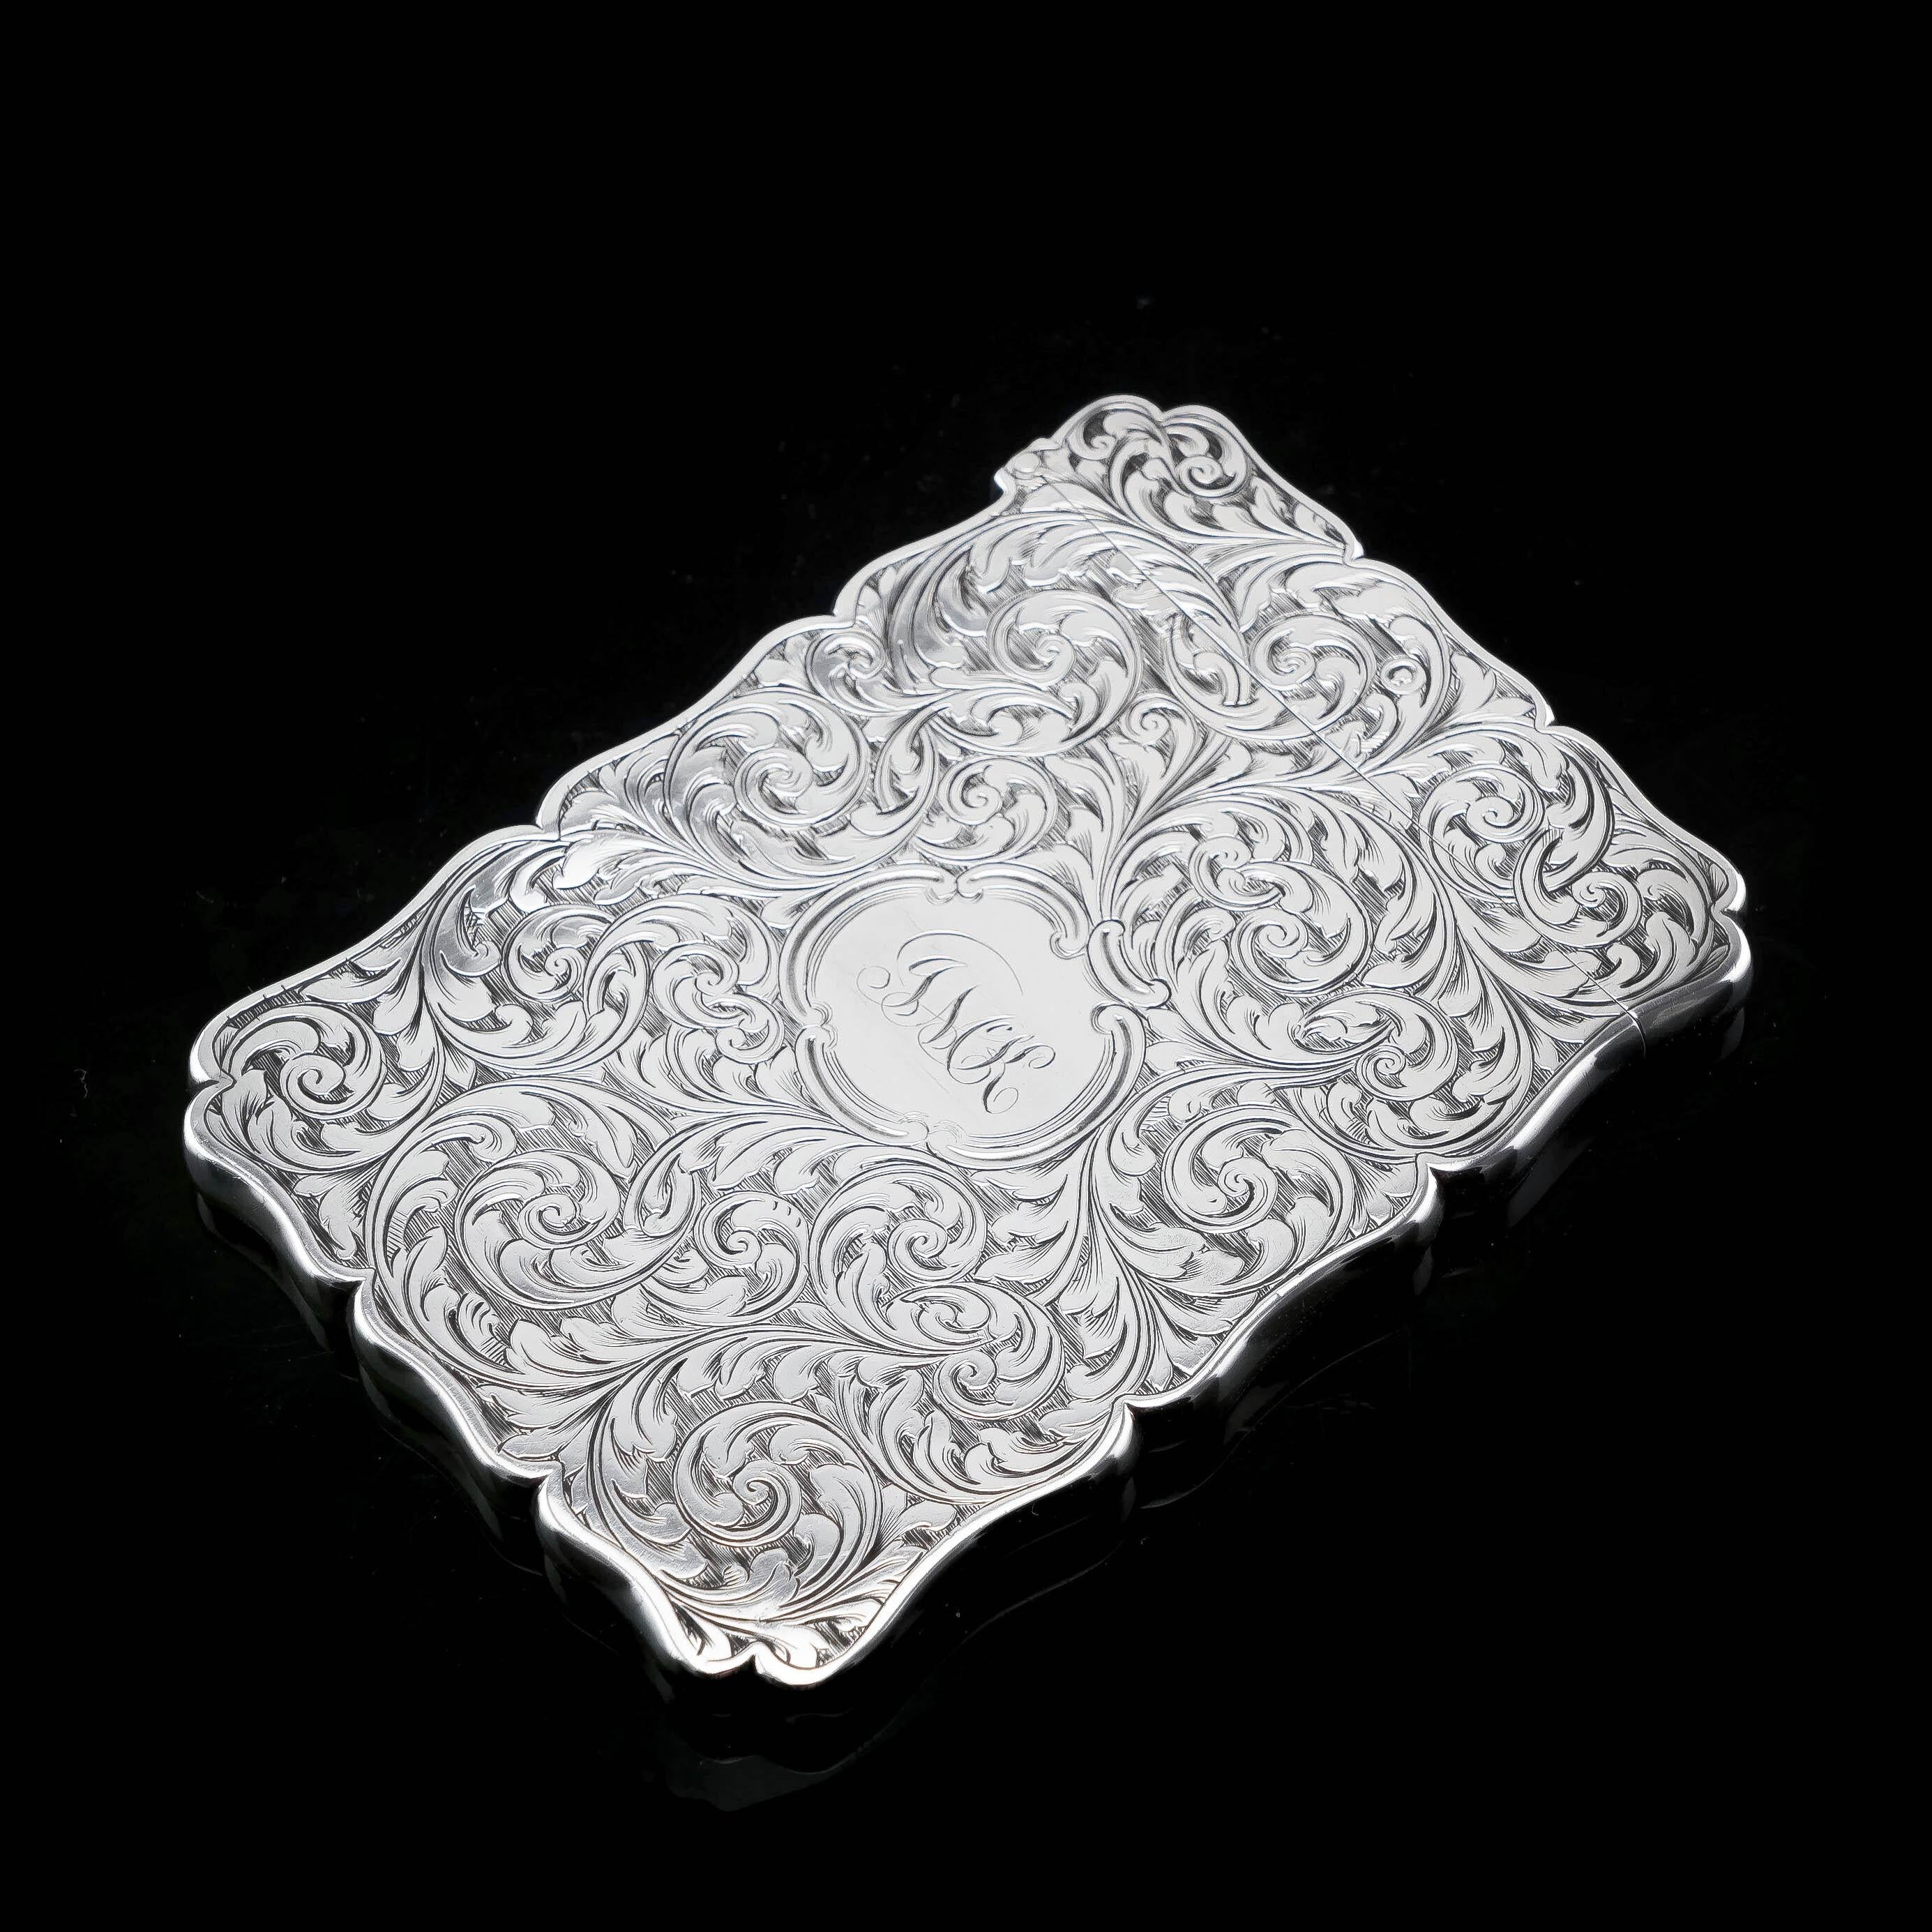 Antique Solid Silver Card Case Engraved Acanthus Motif, Edward Smith, 1862 For Sale 11